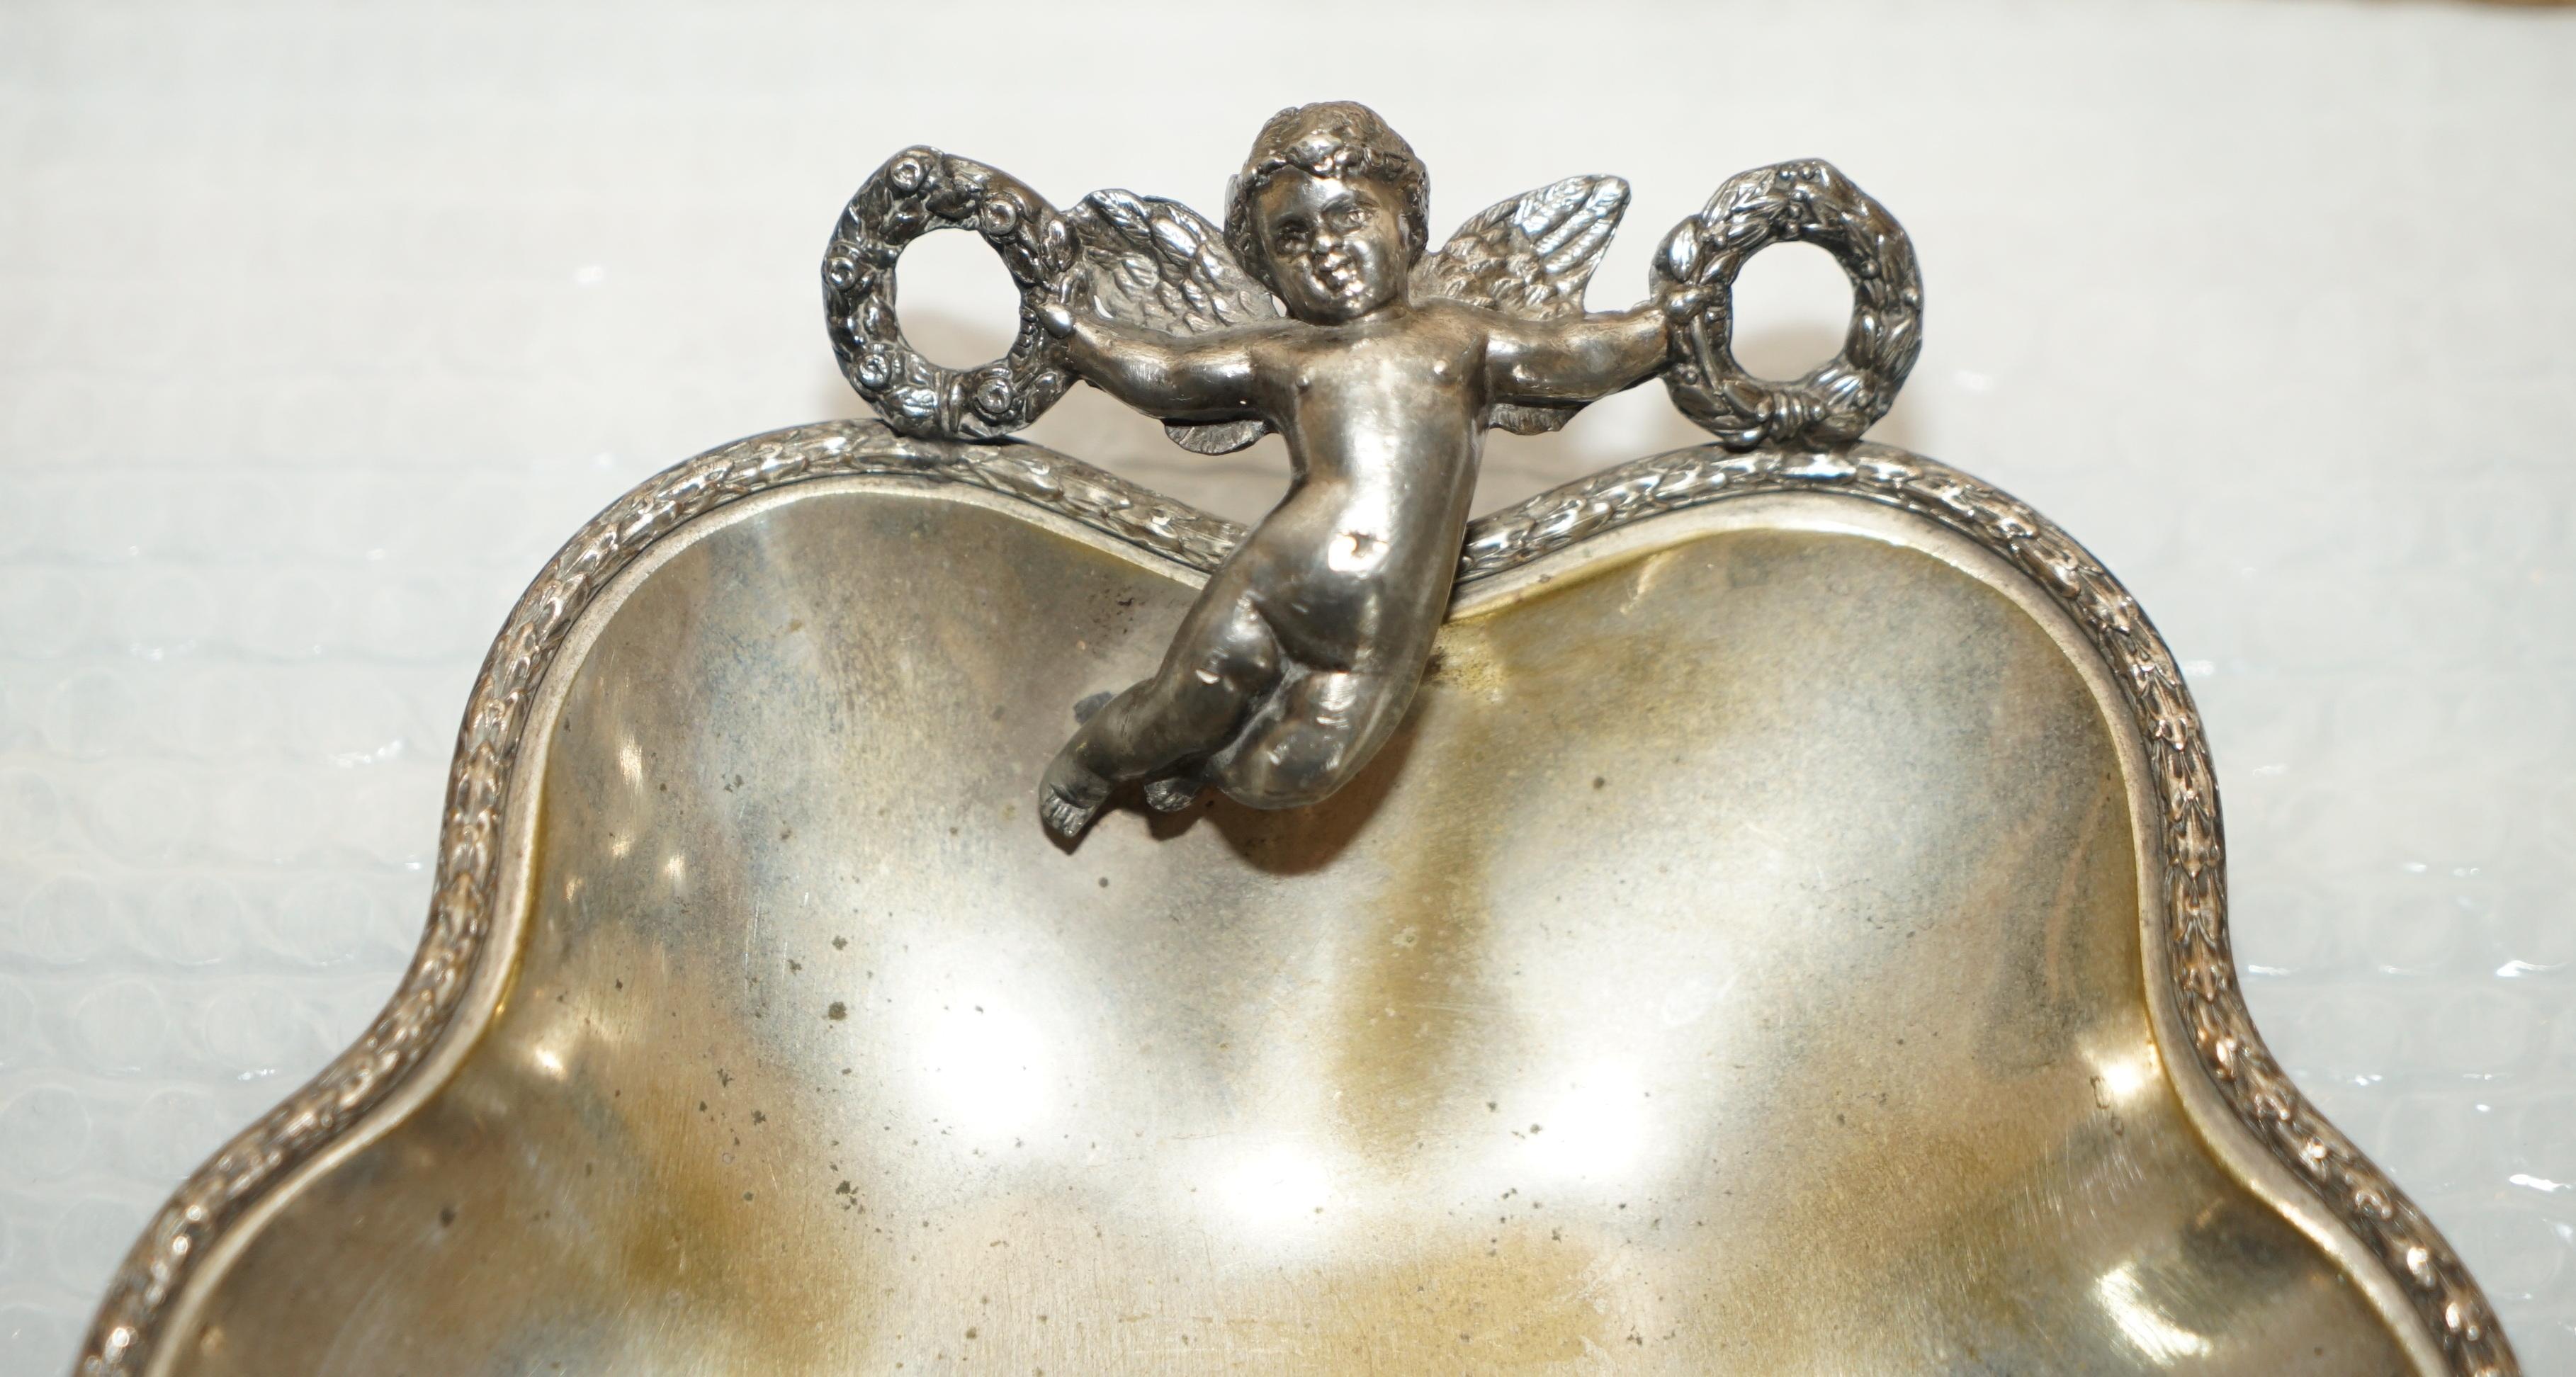 Lovely Antique Original Worn Finish Silver Plated Cherub Handle Serving Tray For Sale 1